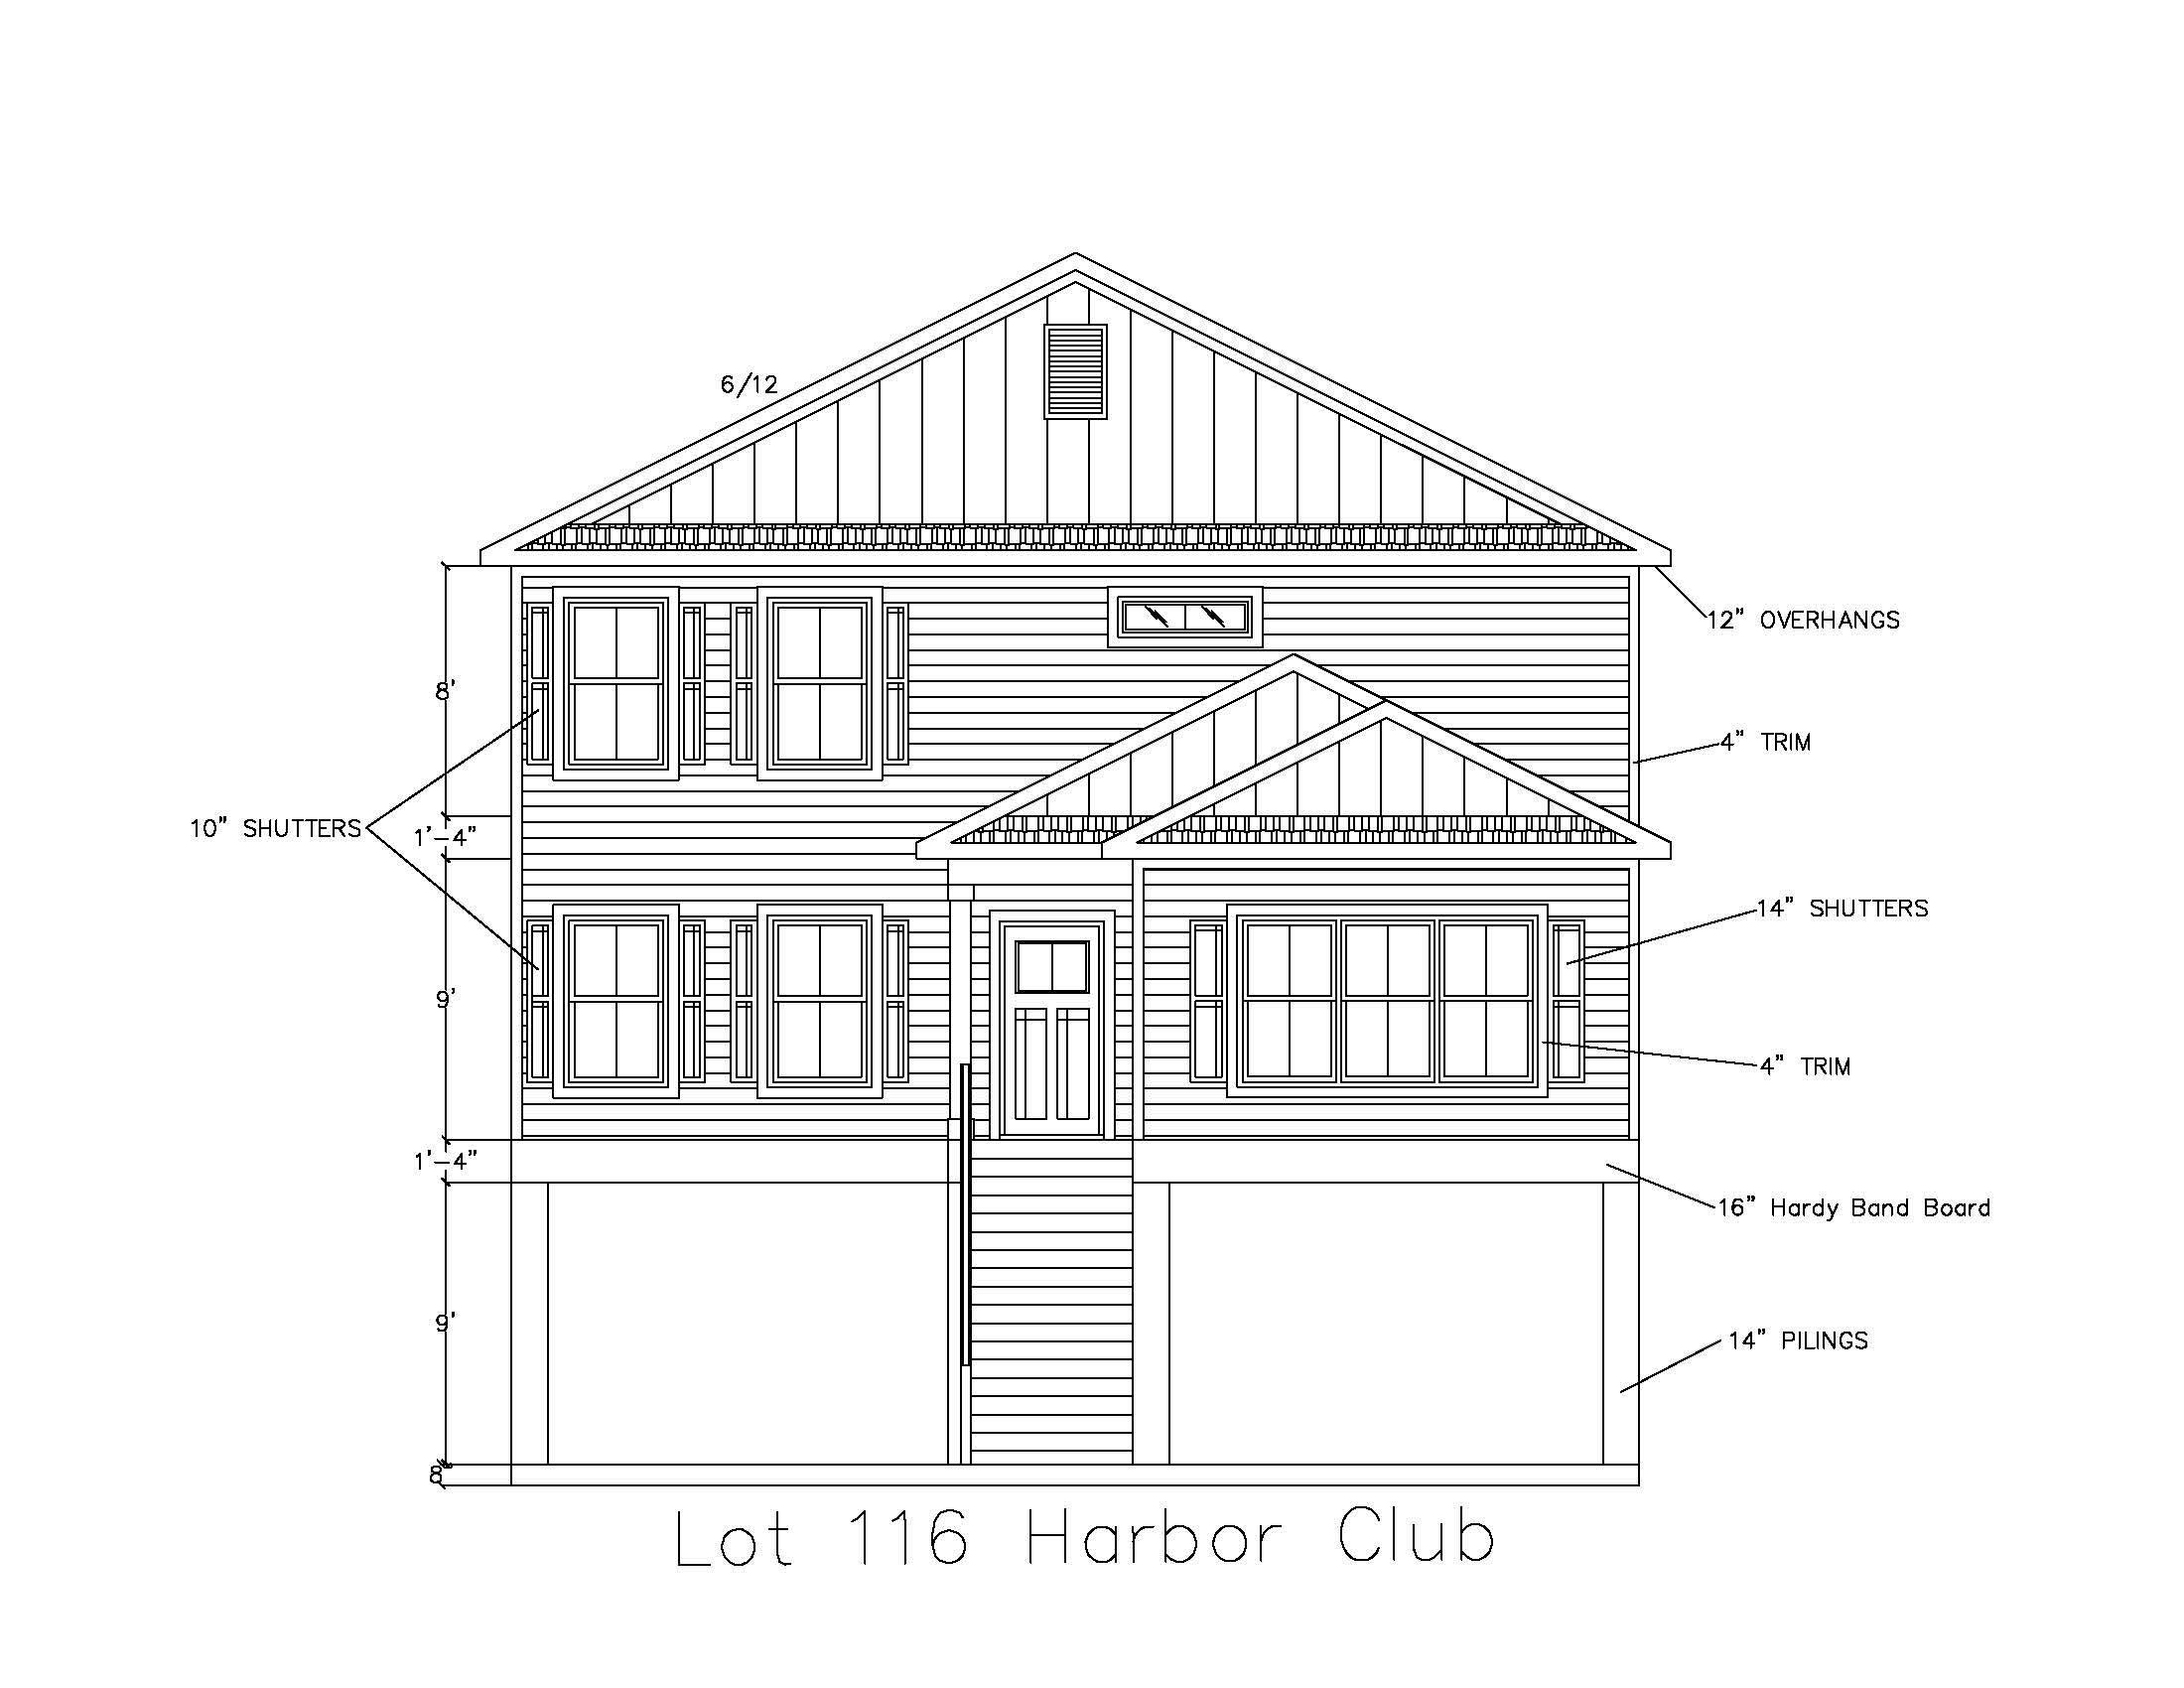 new home in “harbor club” under construction with an “july” completion date.  this new custom floor plan located on a stunning premium winyah bay/intracoastal waterway view homesite.  you will enjoy 4 bedrooms and 2 1/2 baths incorporated into an open design. other features and benefits of this home include but are not limited to; designer kitchen featuring stainless steel appliances, profiled aristokraft™ cottage style cabinets with hardware, quartz countertop package with polished stainless steel sink and pullout faucet, durable waterproof lvp flooring in enyire plan, interior trim package includes window casings and stool for durability and appeal, relaxing baths with cultured marble countertops with integral bowl; executive height vanities in all bathrooms; elongated toilets; contoured fiberglass shower and tub units, maintenance free exterior features such as premium vinyl siding, soffits and fascia; and high performance gaf™ architectural shingles ,  spacious covered rear porch, natural gas package including, gas heat, rinnai™ tankless hot water, and gas range,) and spacious ground floor parking. harbor club is located on south island road within minutes to the harbor walk and all major thoroughfares creating convenient and quick access to all that georgetown, pawleys island, murrells inlet, and myrtle beach have to offer. building lifestyles for over 35 years, we remain the premier homebuilder of new residential communities and custom homes in the grand strand and surrounding areas. in 2023, 2022, and 2021, we received the best home builder award from wmbf news best of the grand strand. we want you to experience the local pride we build today and every day in horry and georgetown counties. we are excited to welcome you home at harbor club!